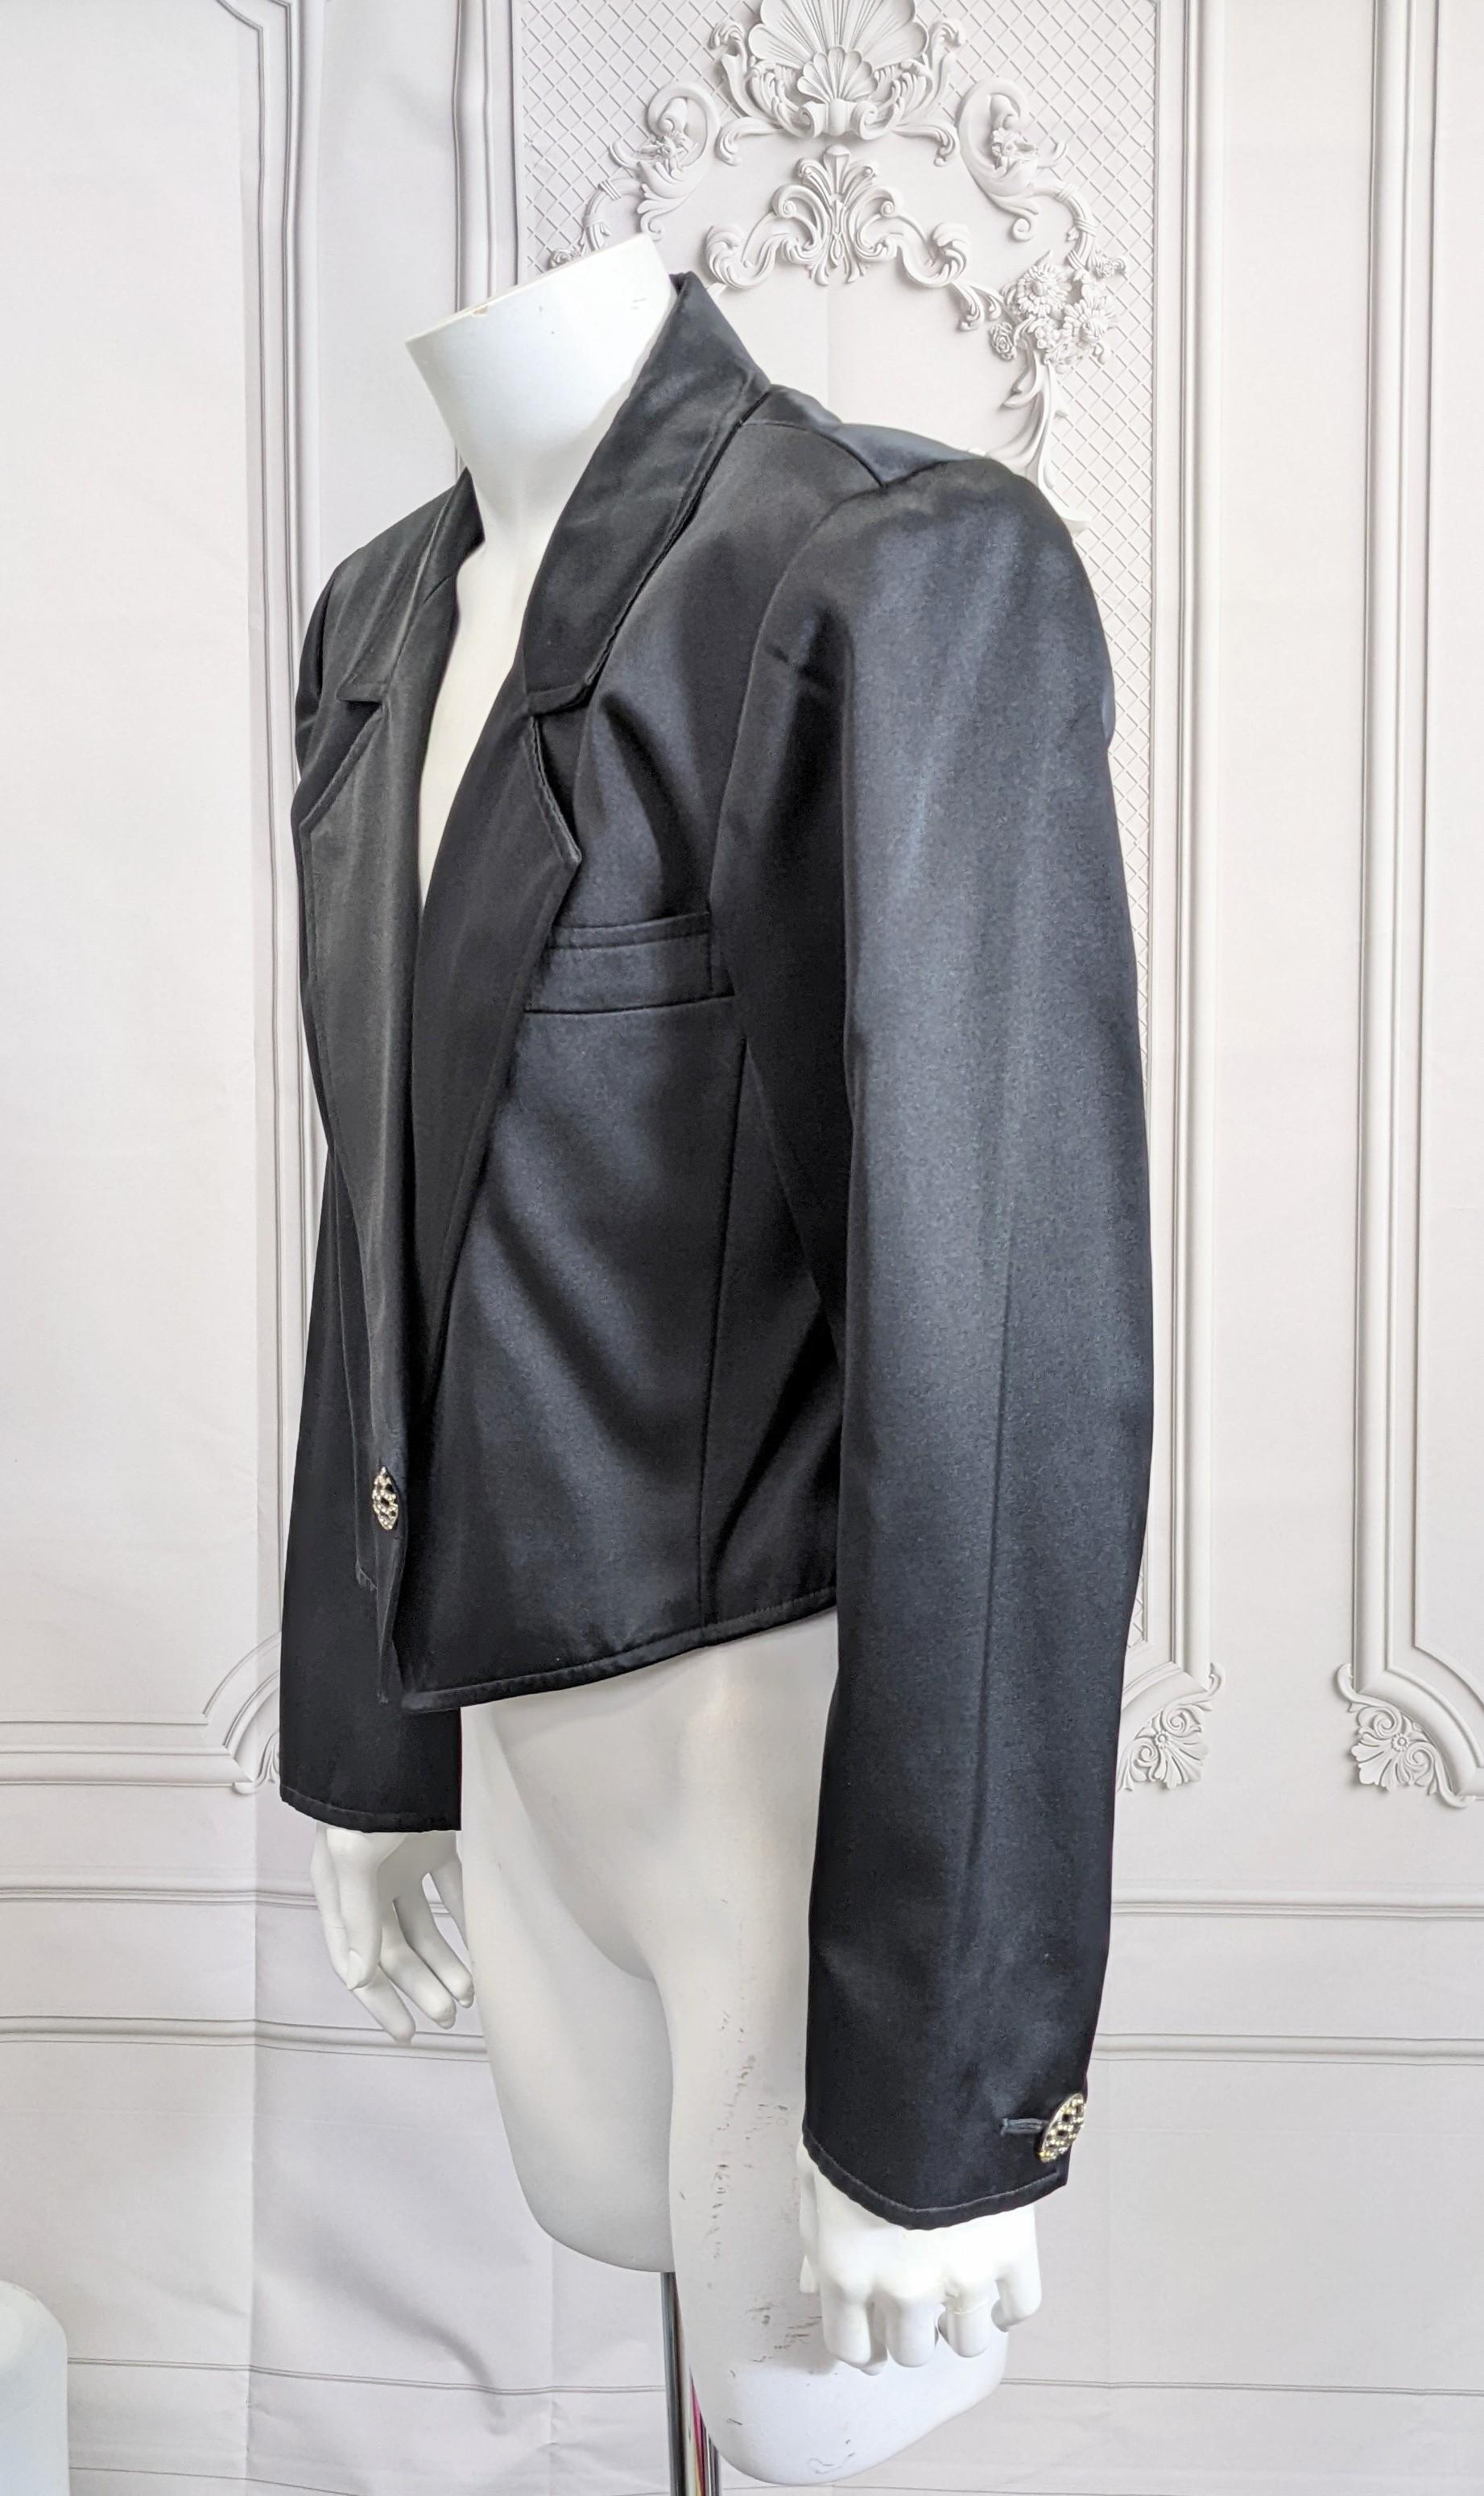 Yves Saint Laurent Satin Spencer Jacket In Good Condition For Sale In New York, NY